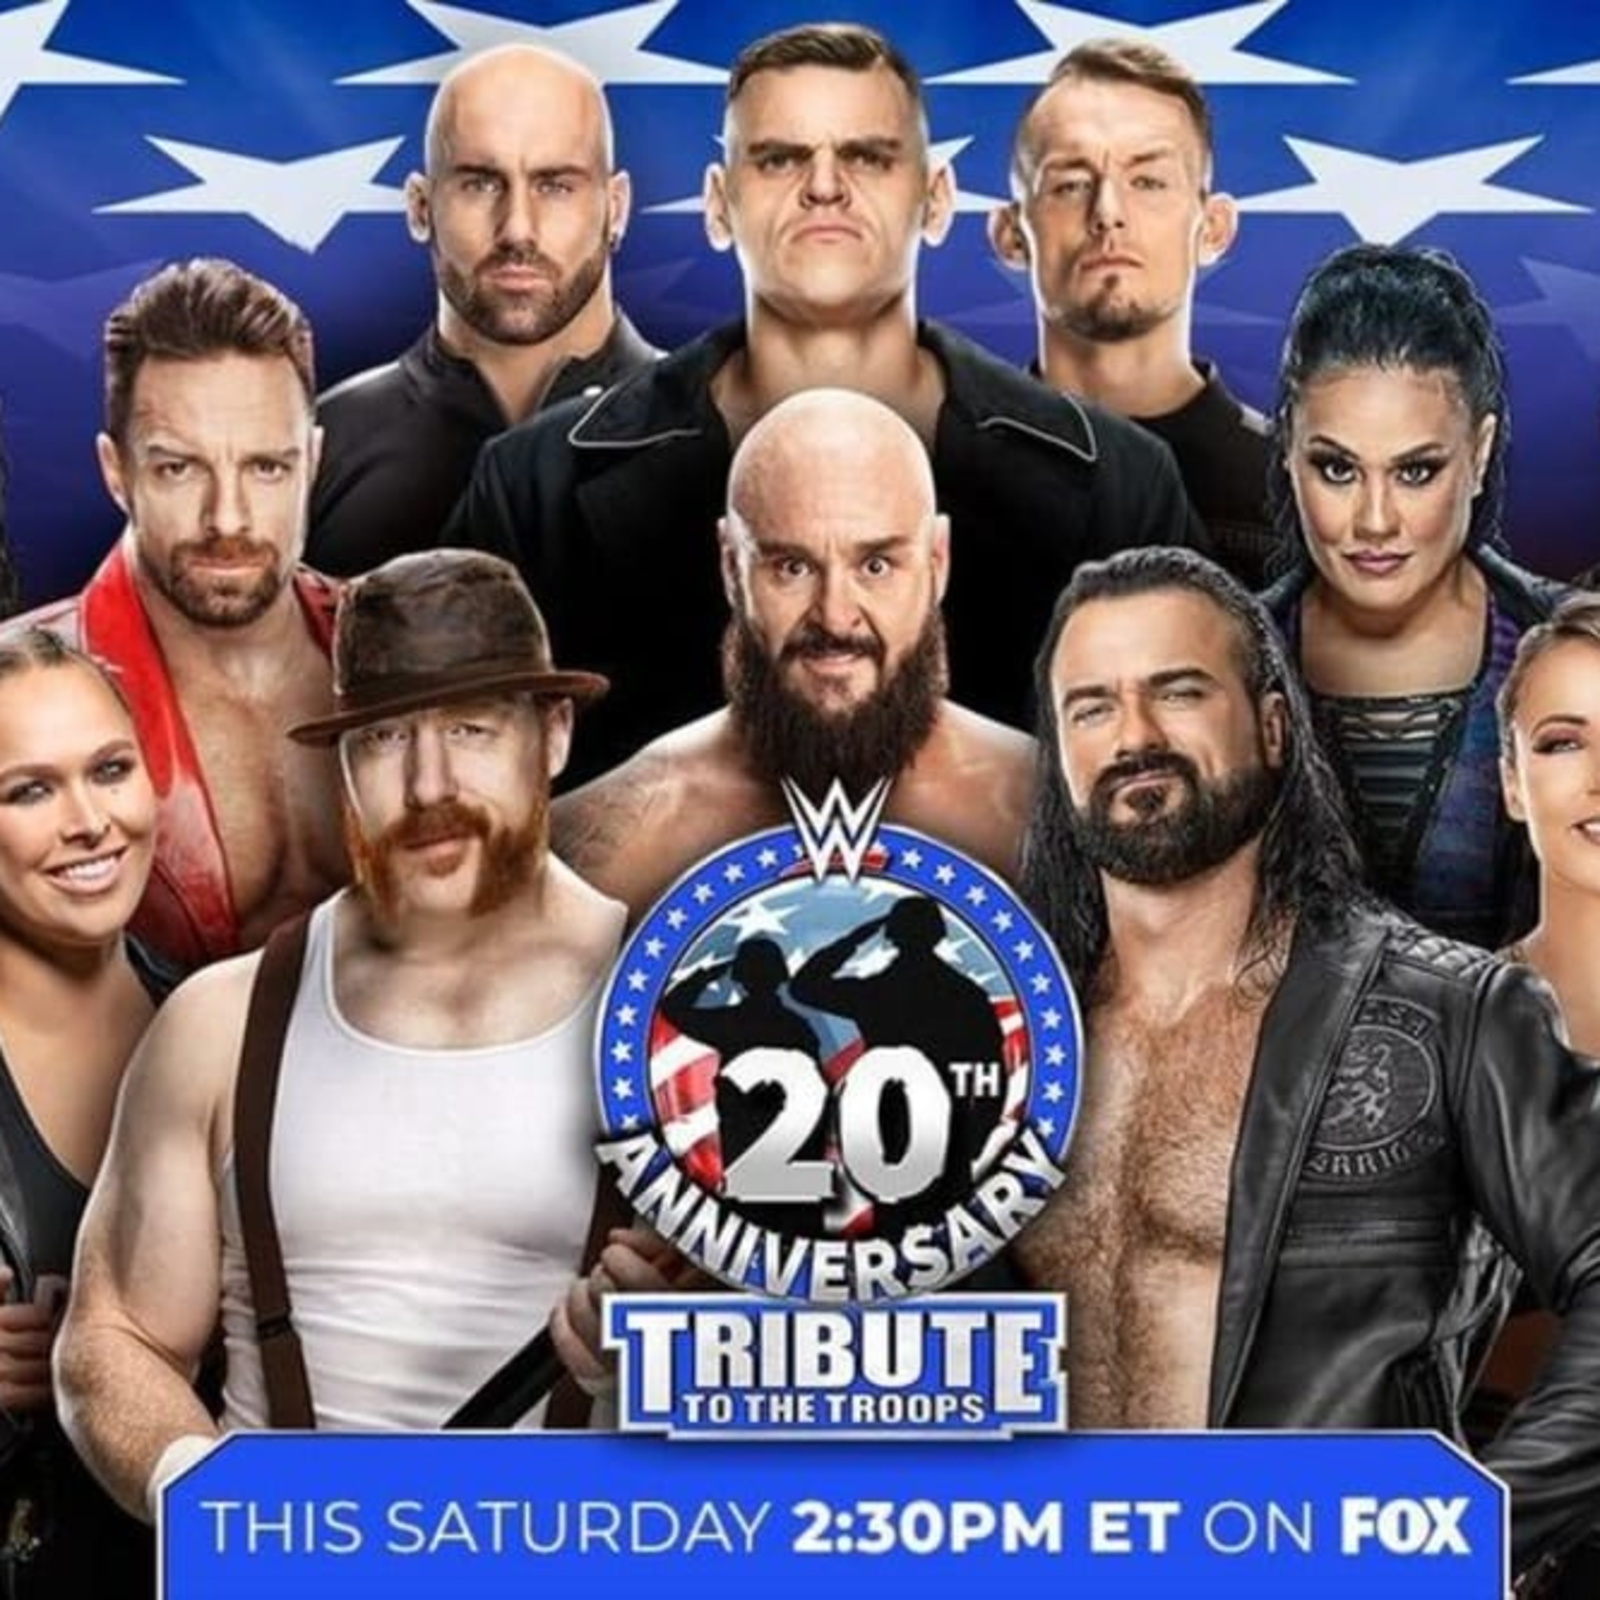 Wwe Tribute To The Troops 2022 12 17 22 December 17th 2022 31264 Poster.jpg